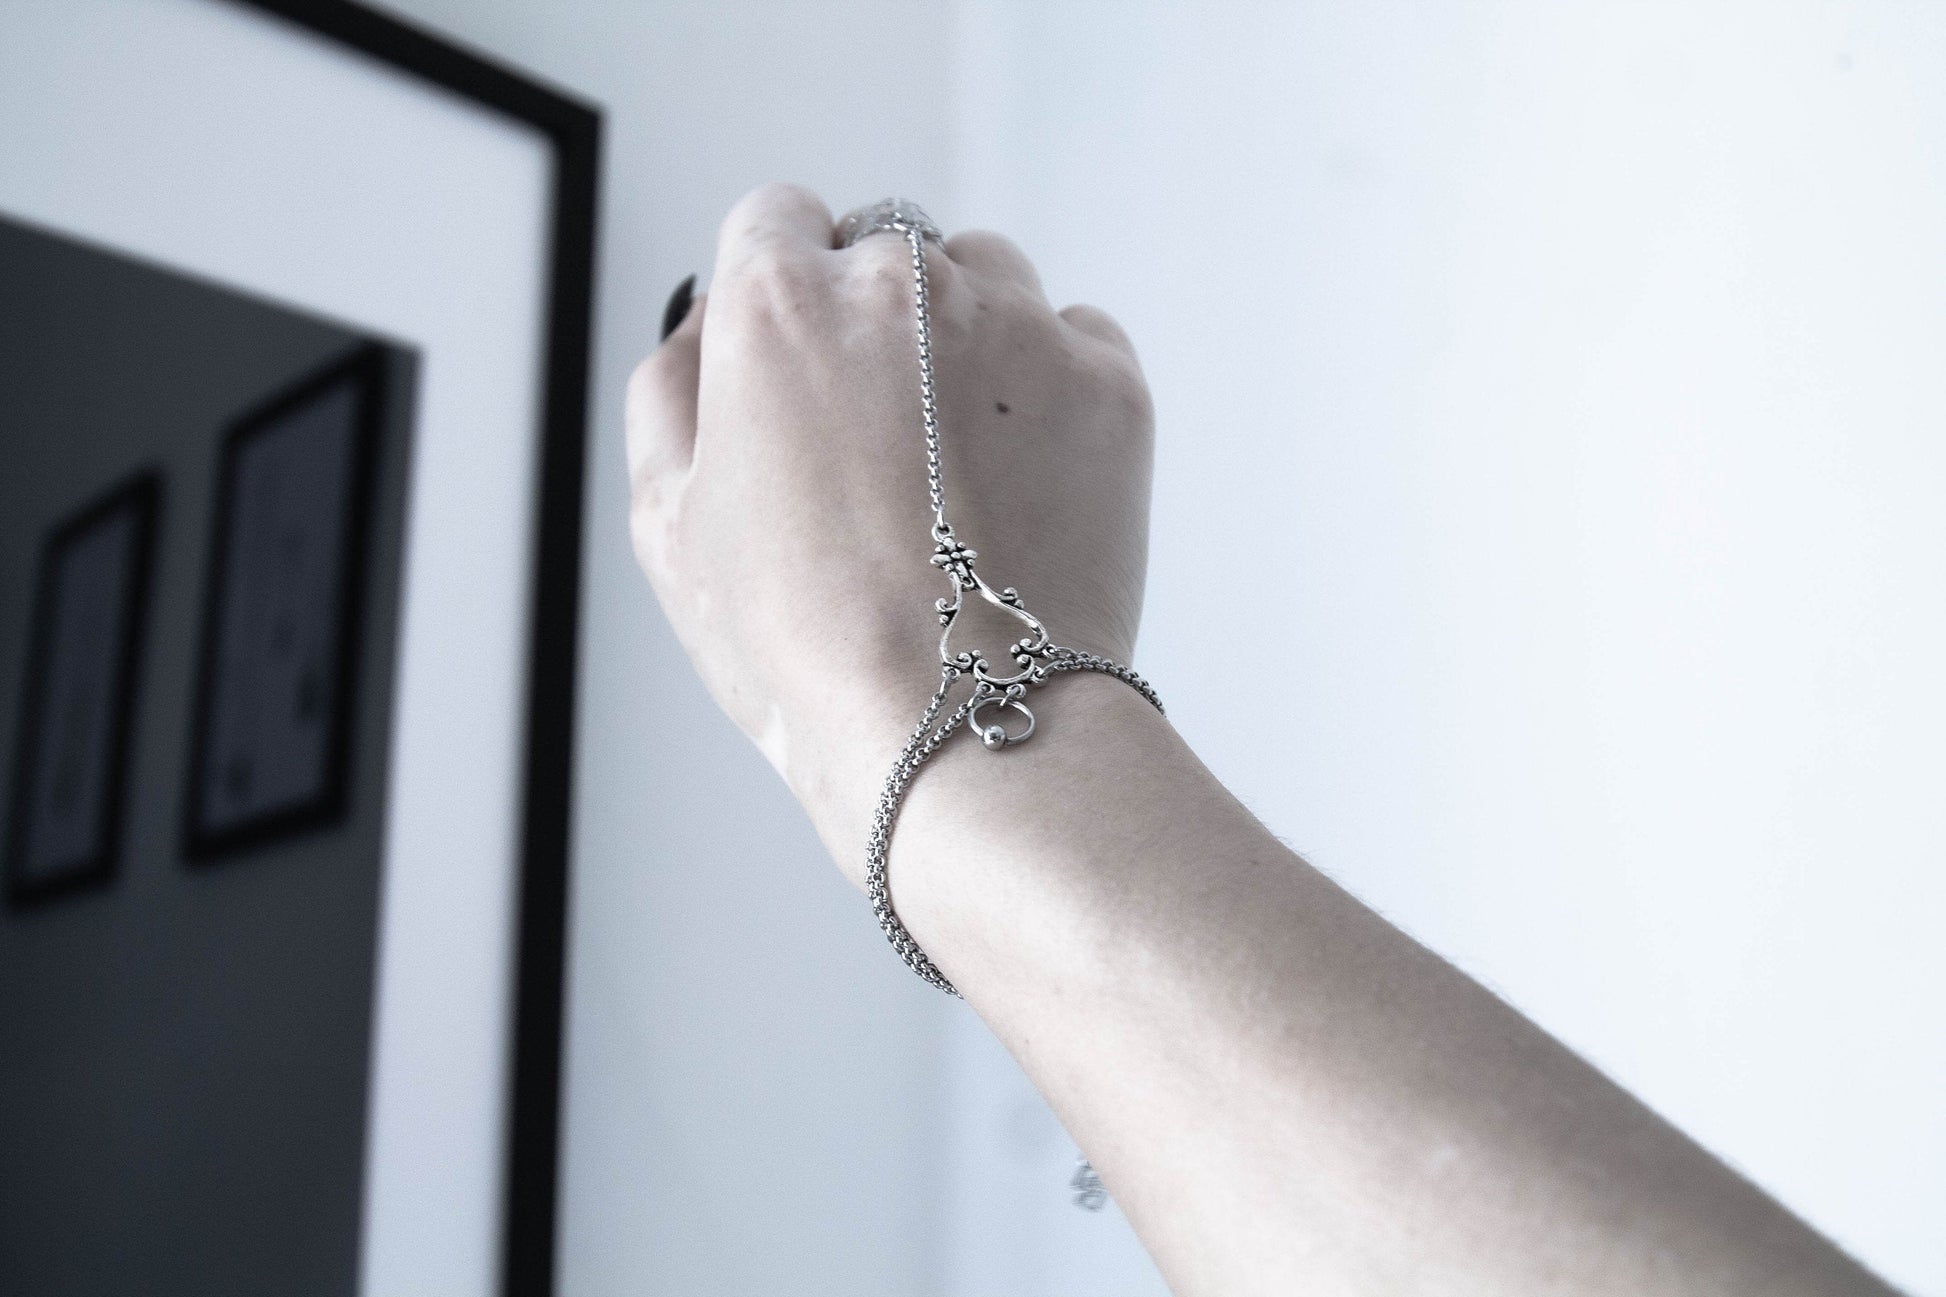 A hand showcases a Myril Jewels slave bracelet ring with delicate chain connections, a blend of neo-gothic charm and dark elegance, ideal for those who embrace a gothic-chic lifestyle.